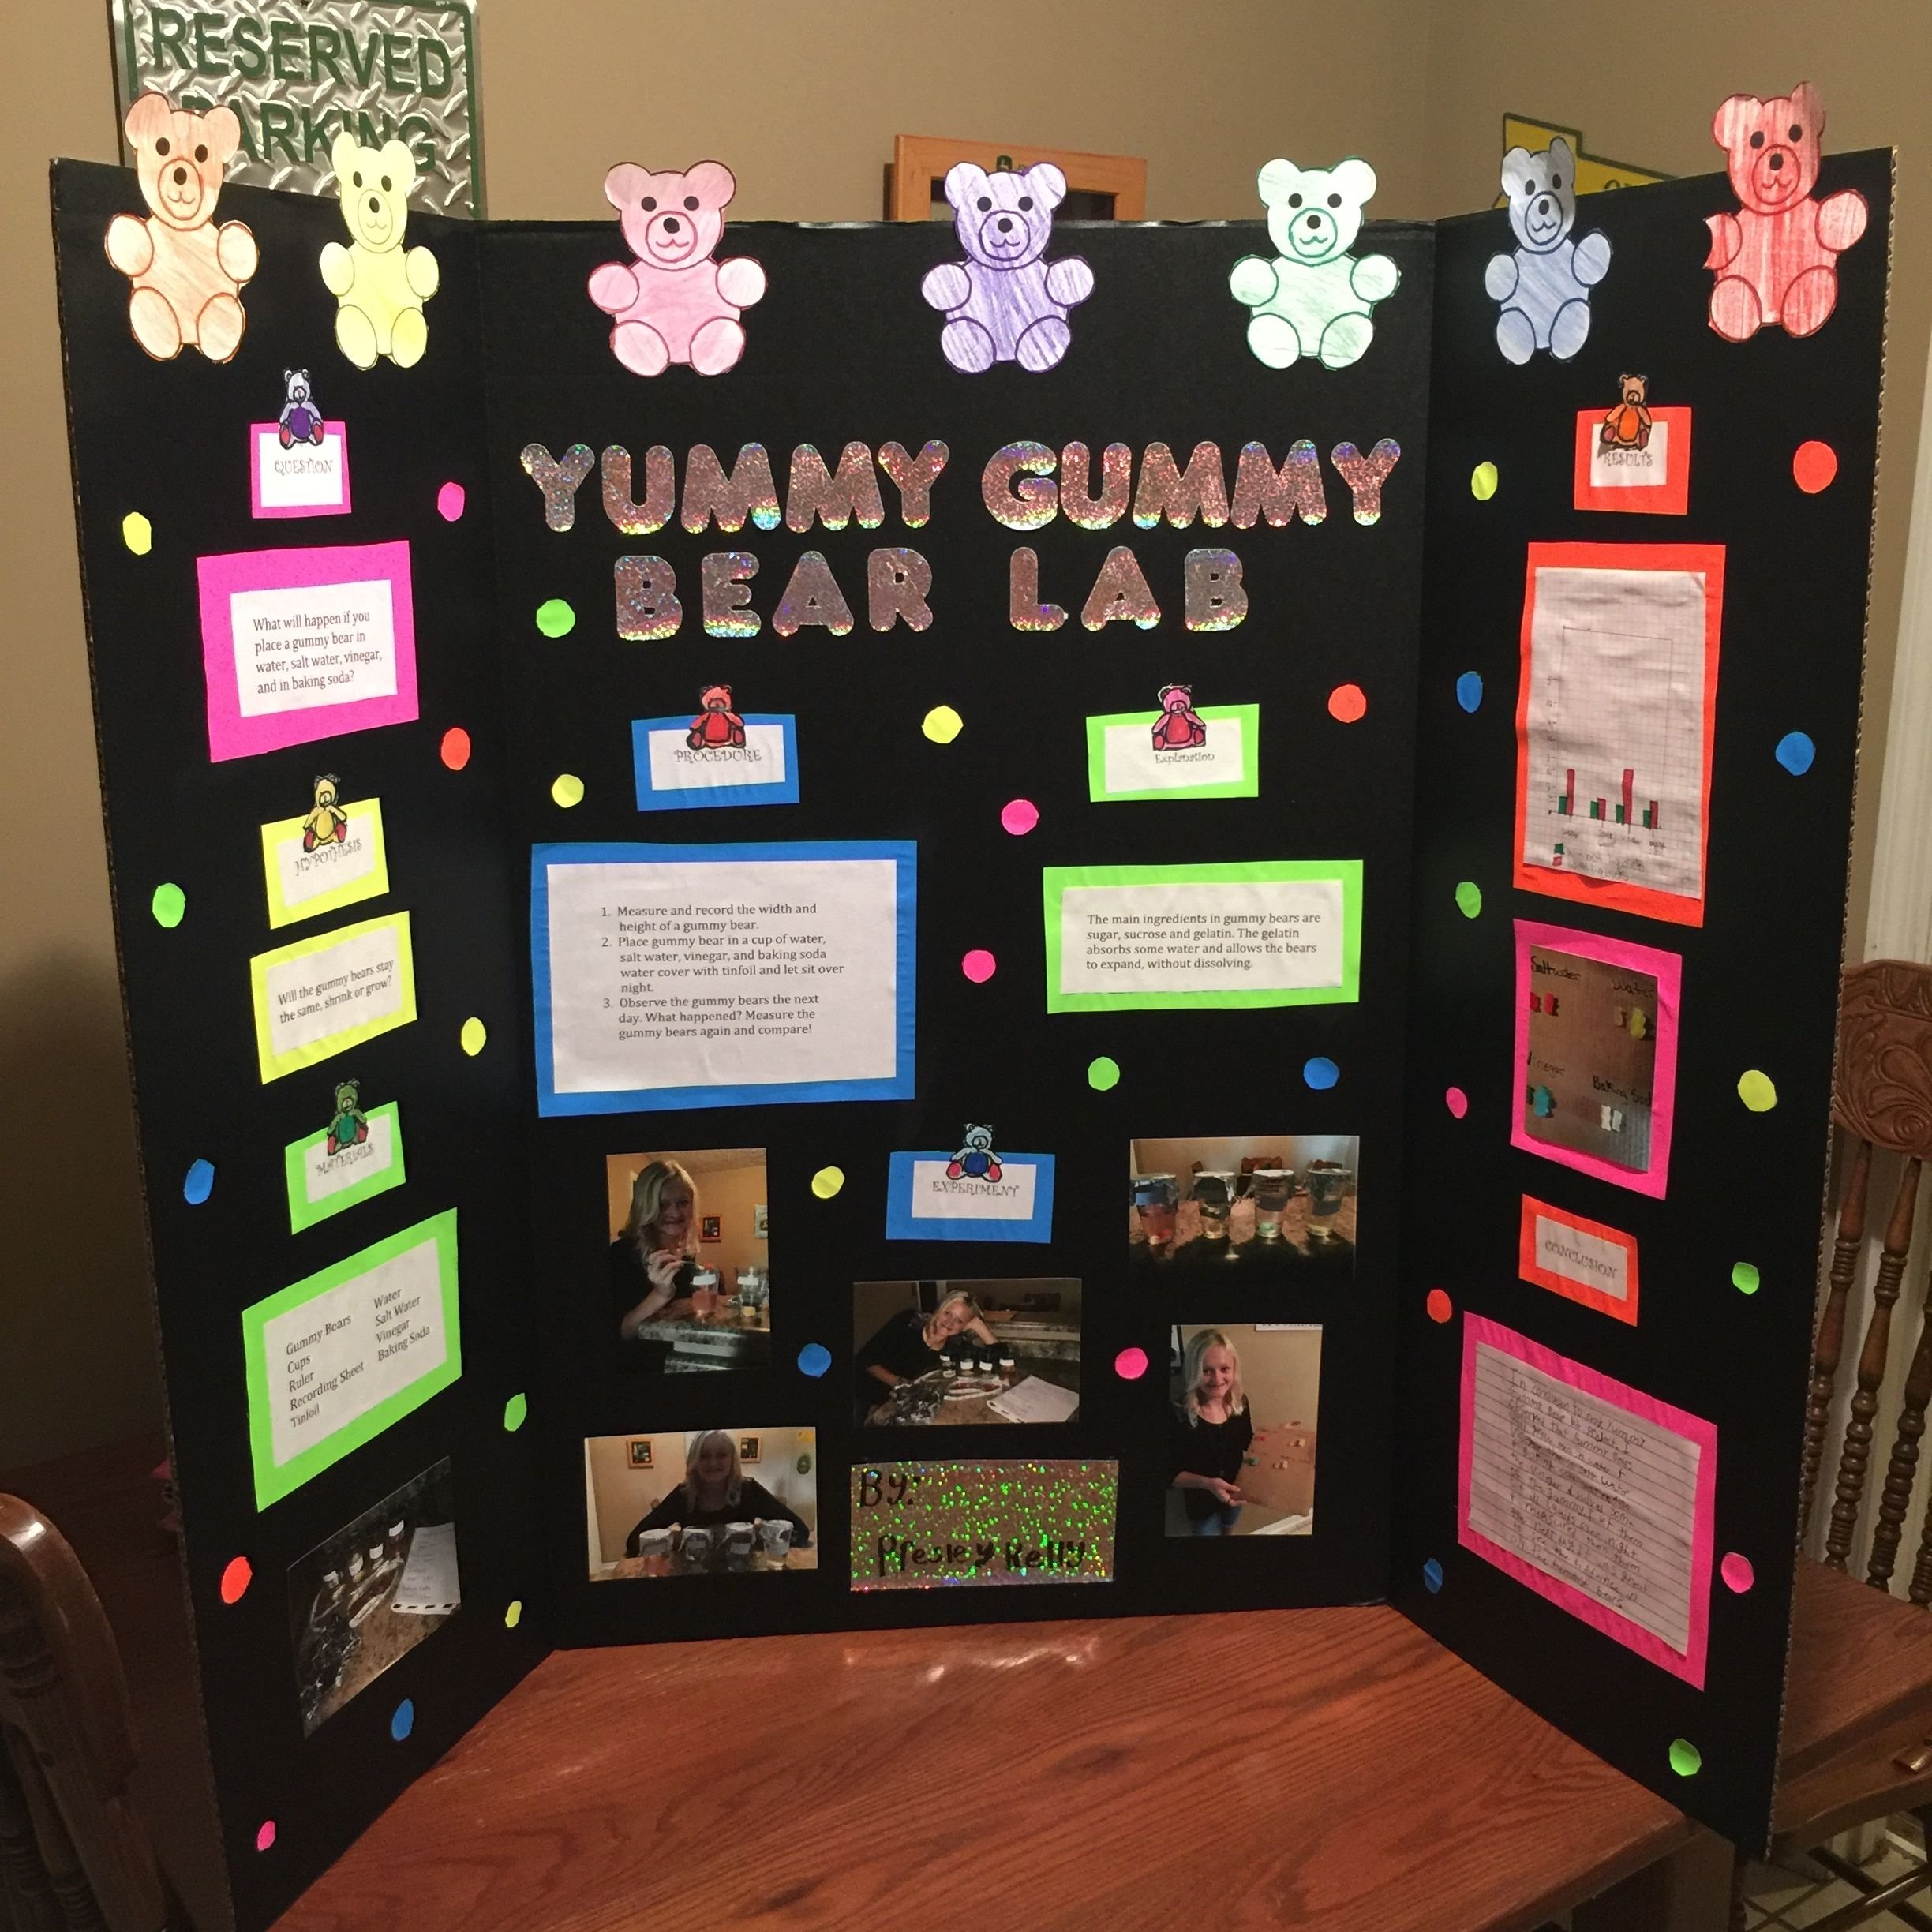 10 Attractive Fourth Grade Science Project Ideas our 4th grade science fair project yummy gummy bear lab lots of 9 2022